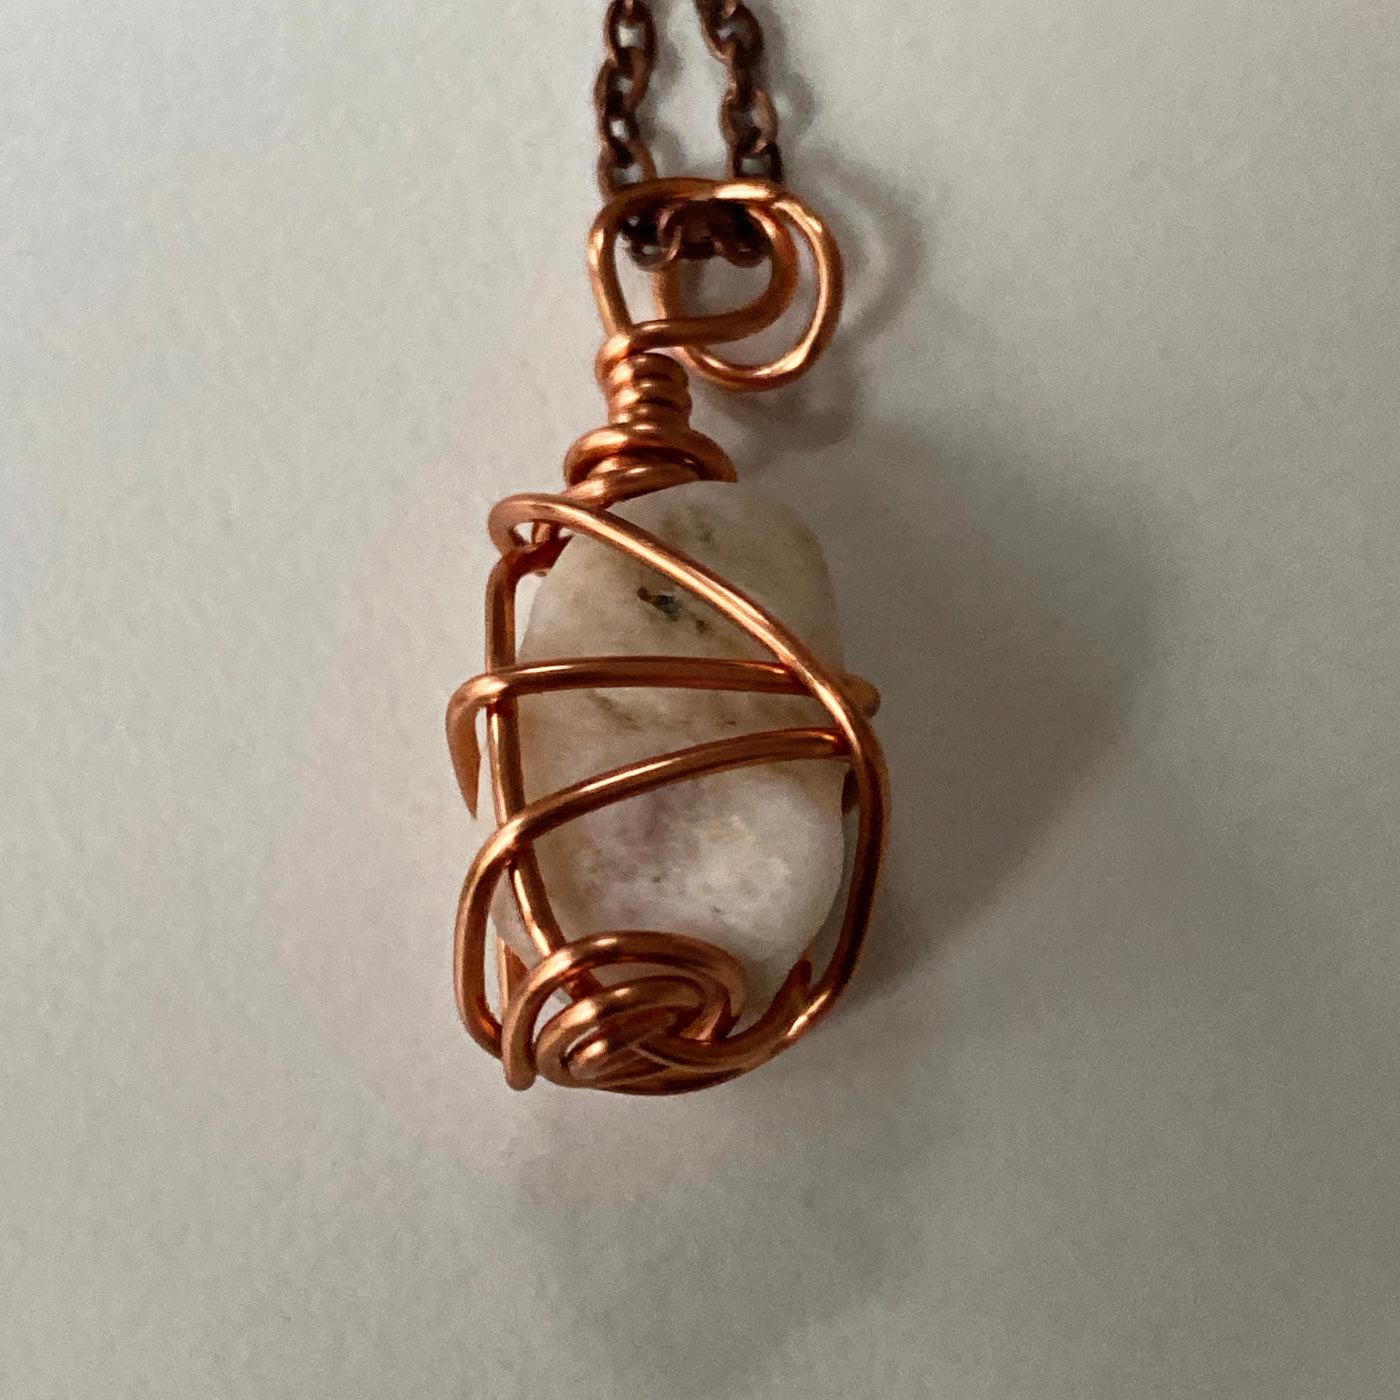 Small pendant. White natural stone and wire. Elbastones collection.